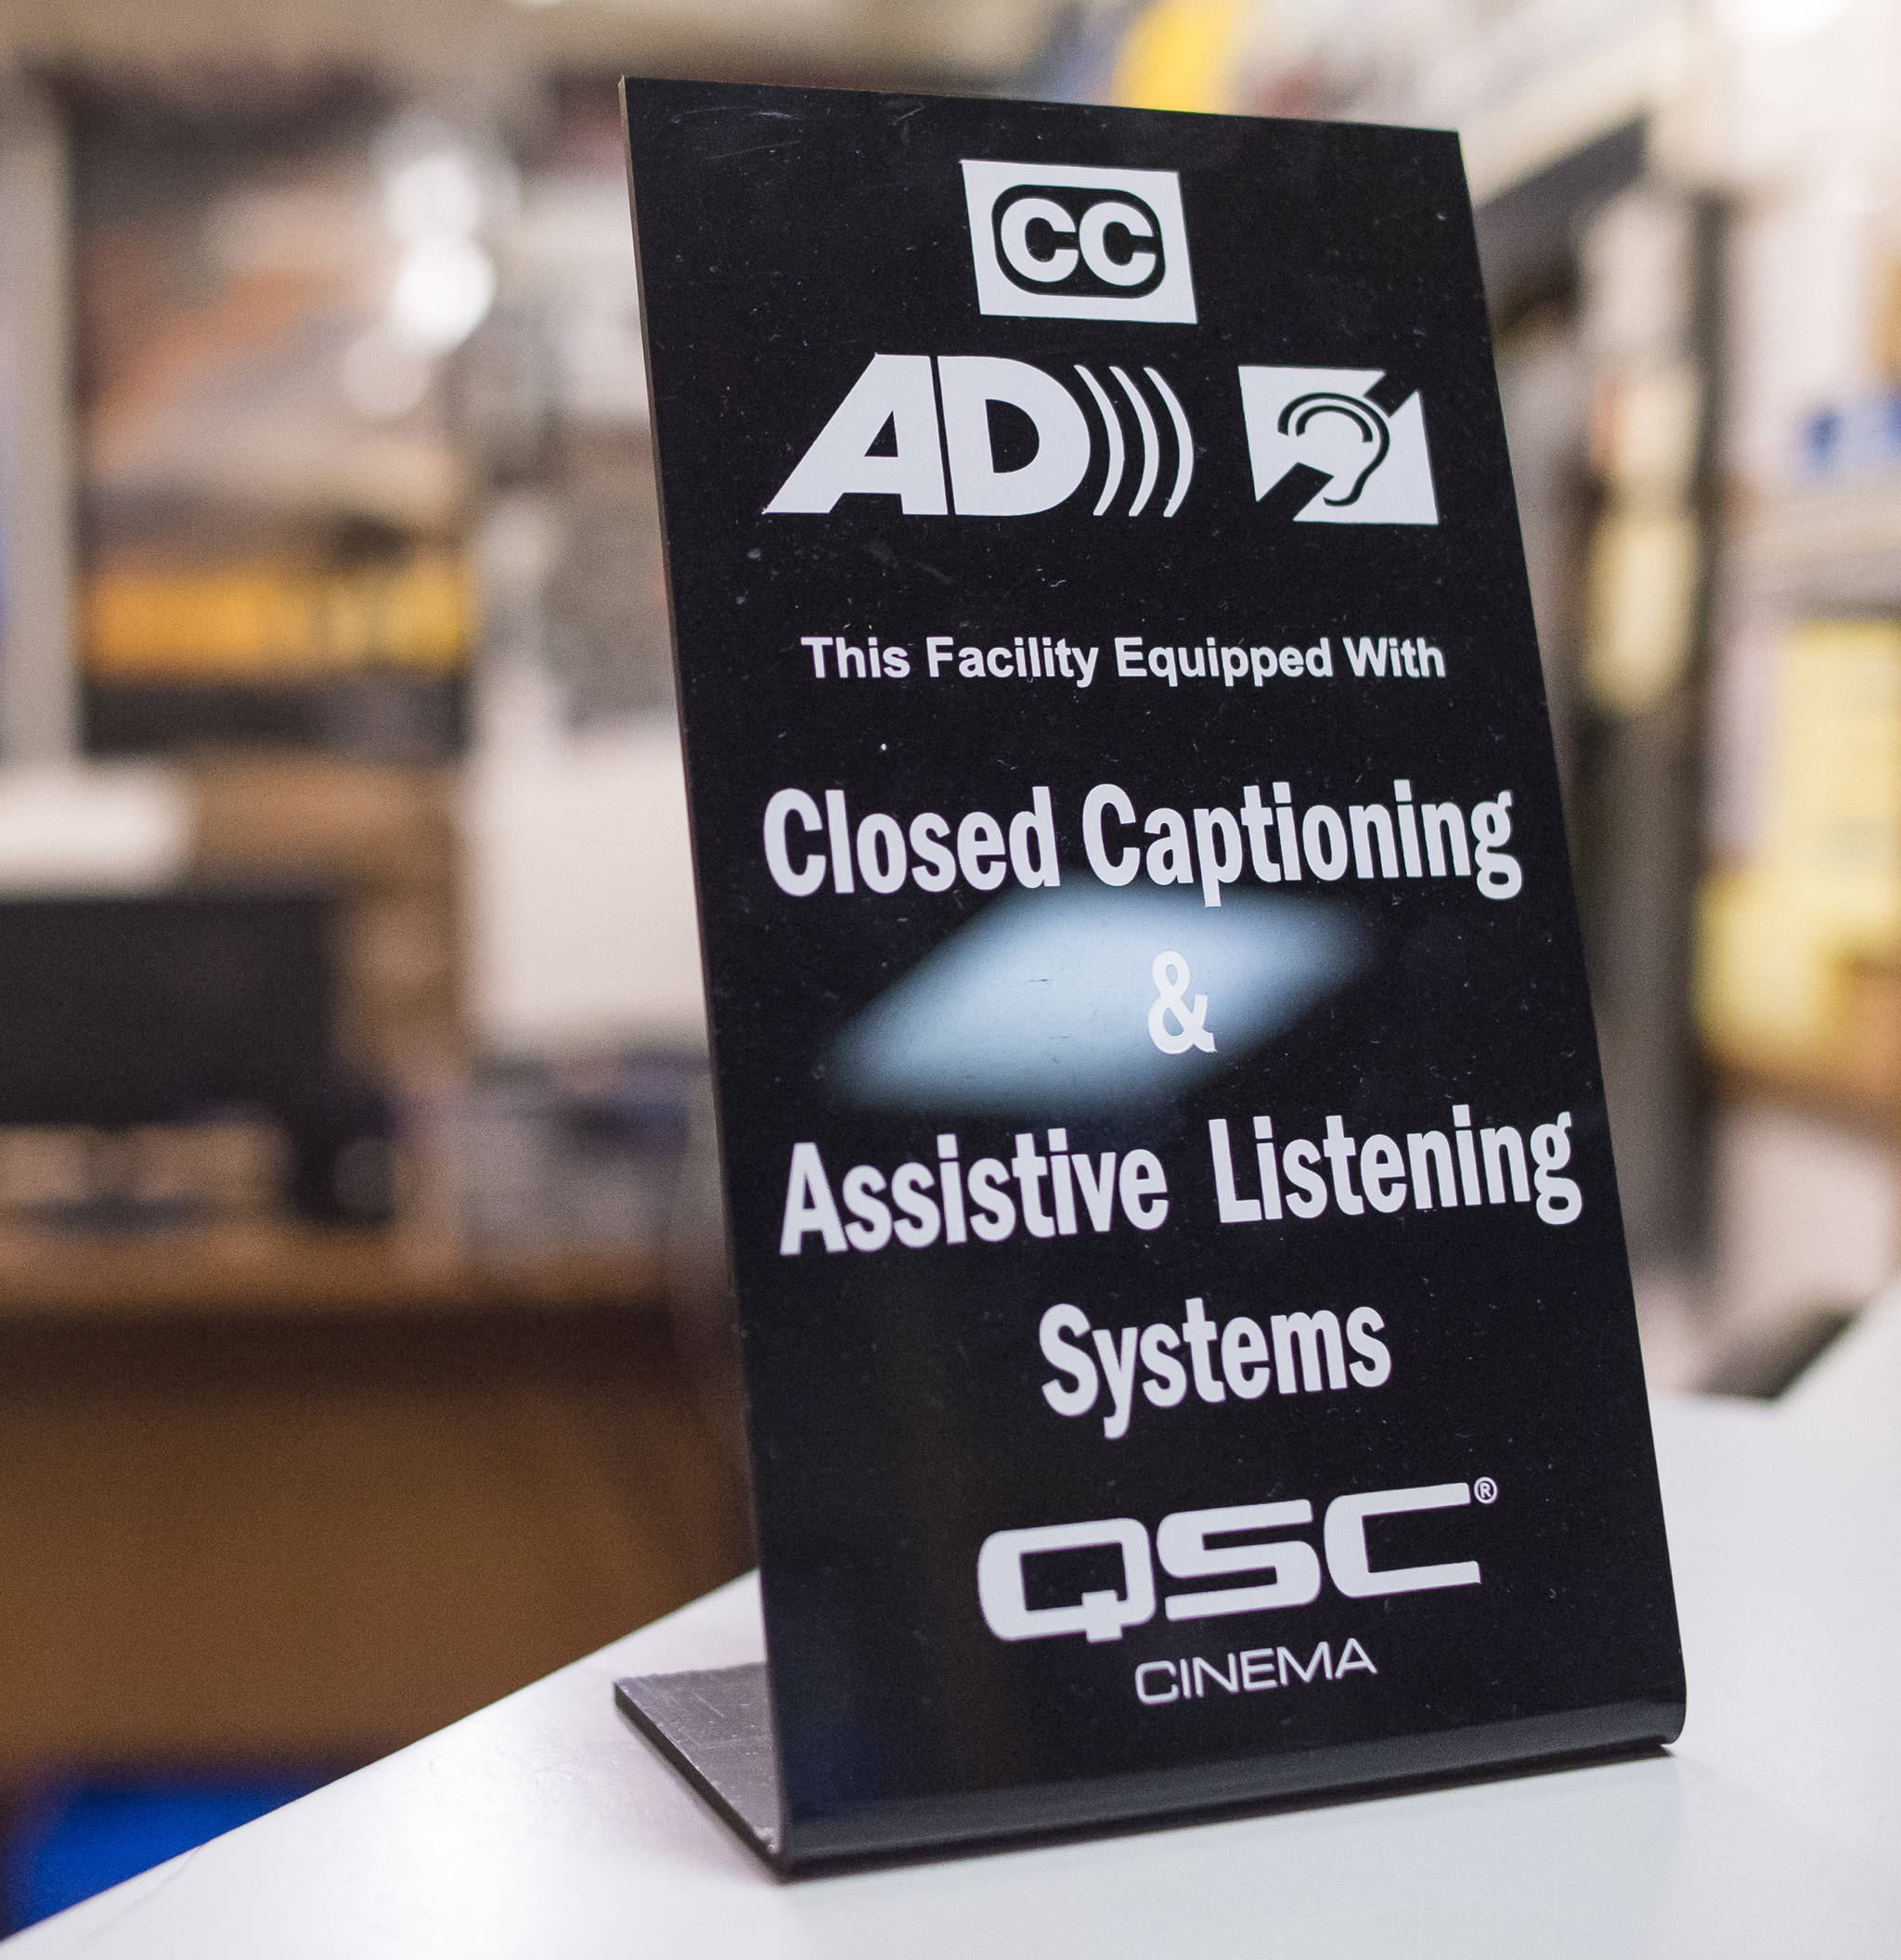 A sign announces new closed captioning and assistive listening systems at the 20th Century Theatre in downtown Juneau on Monday, July 16, 2018. The systems are available both downtown and their Glacier Cinemas in the Mendenhall Valley. (Michael Penn | Juneau Empire)